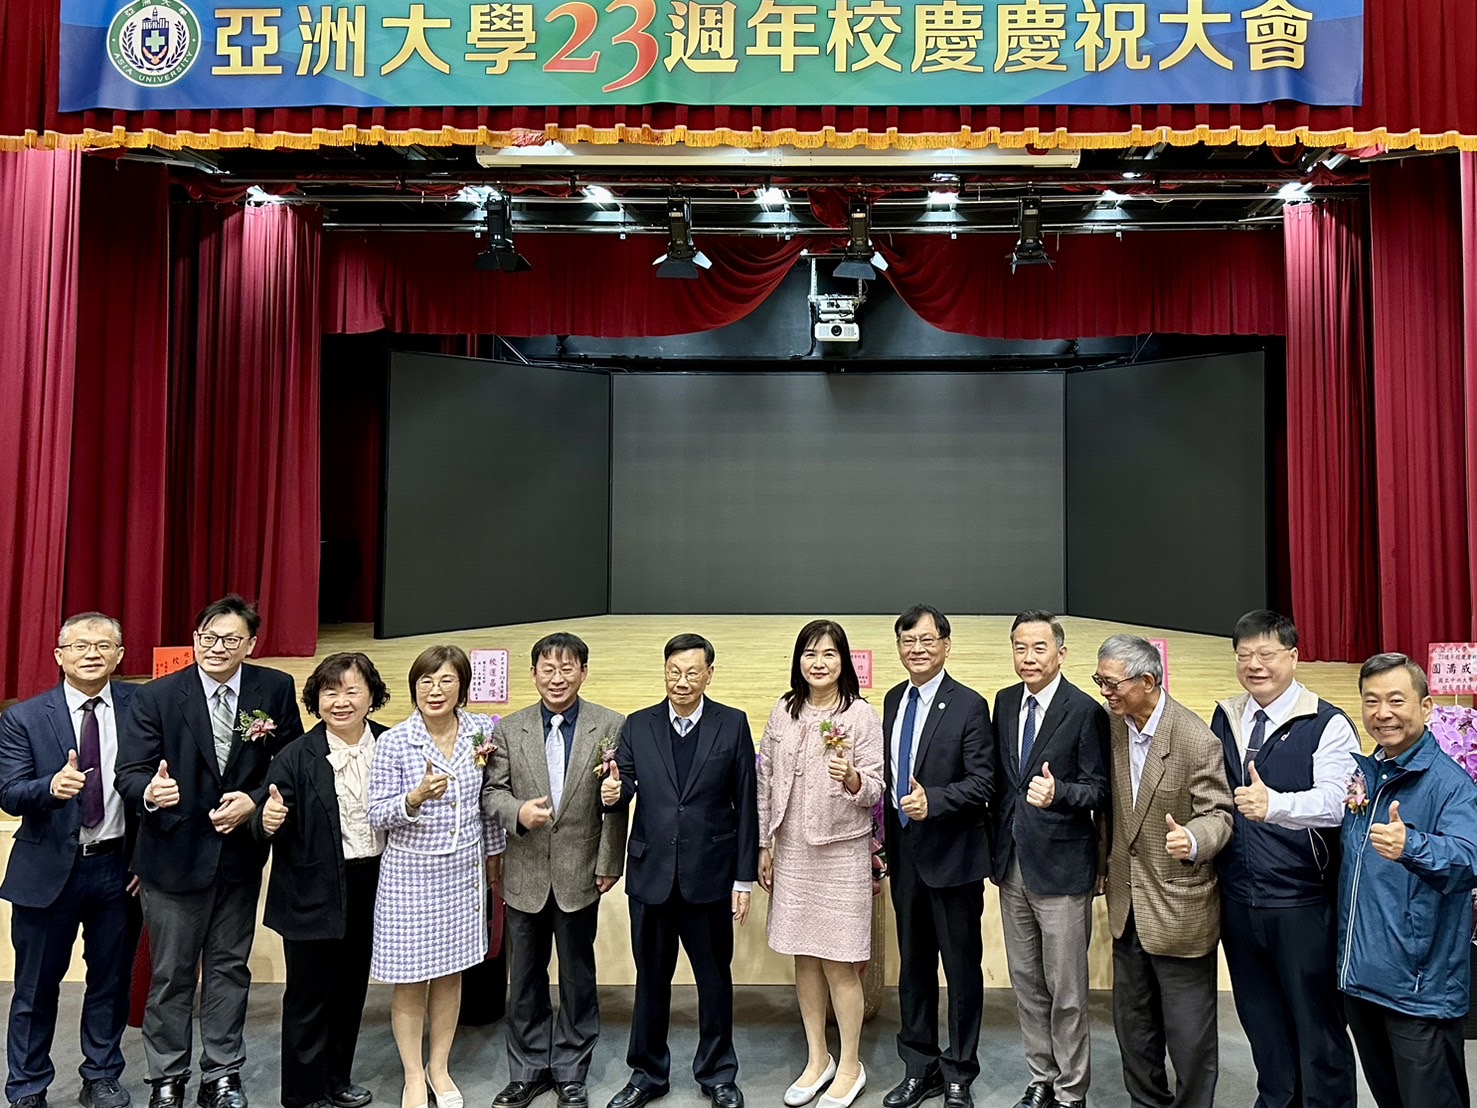 Asia University's 23rd anniversary celebration: President Jeffrey J.P. Tsai (6th from the left) with various high school principals and representatives attending the event